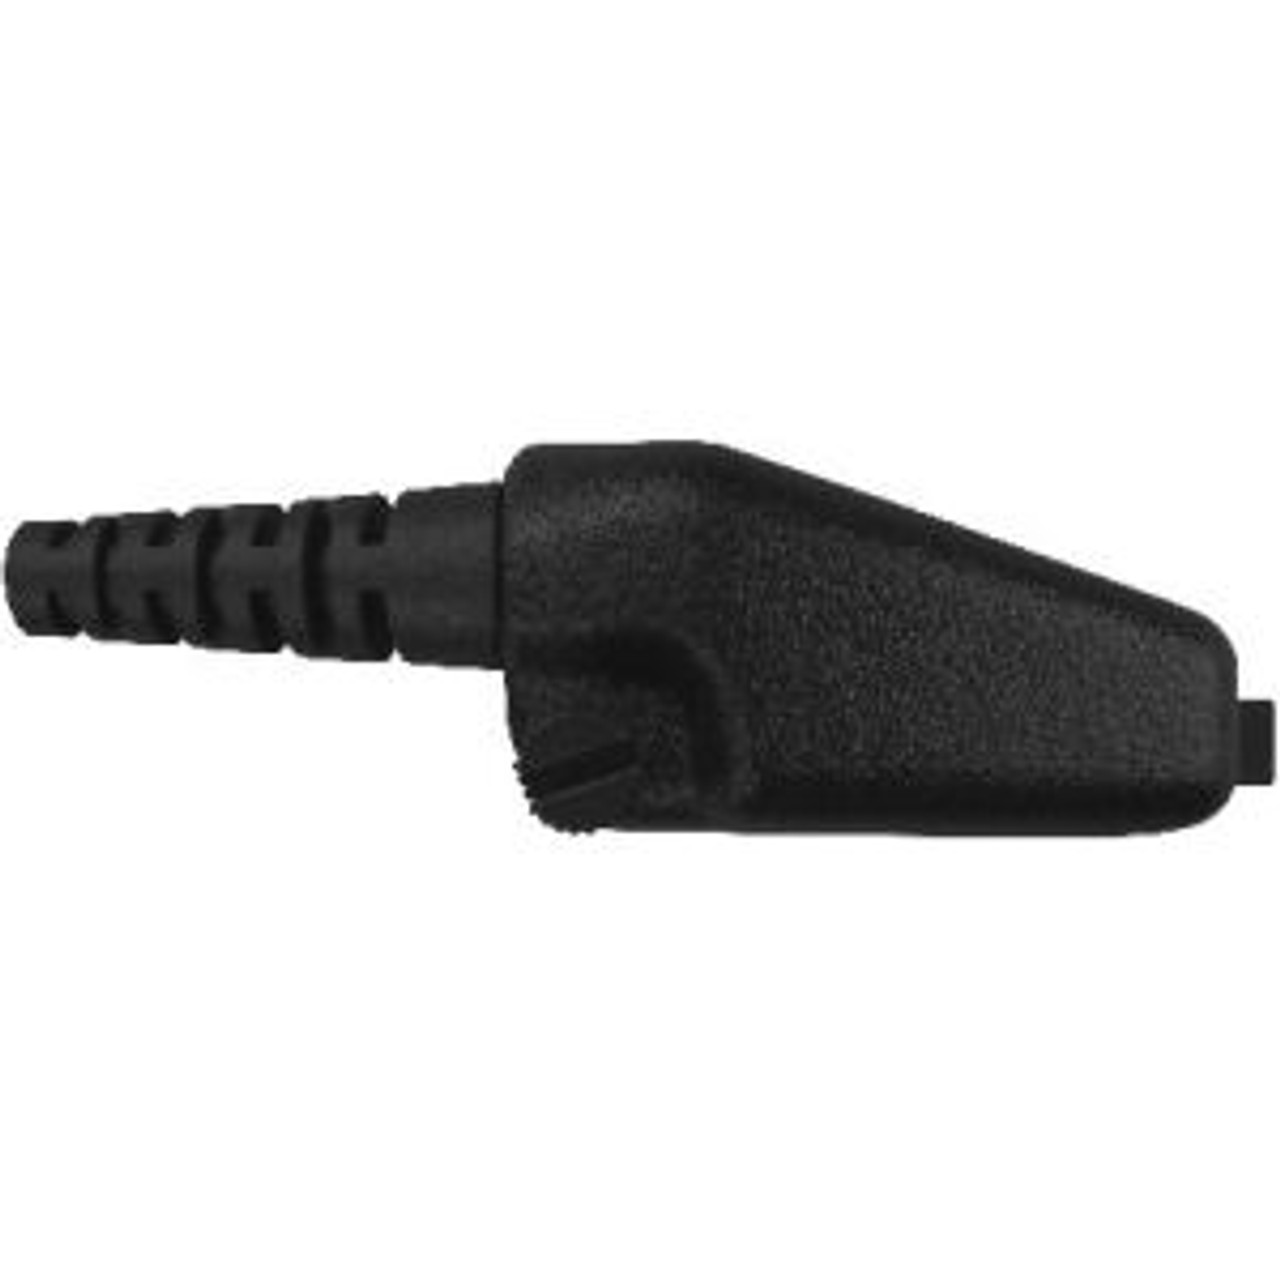 Otto ClearTrak NRX Behind The Head Double Muff Headset For Kenwood TK-3170